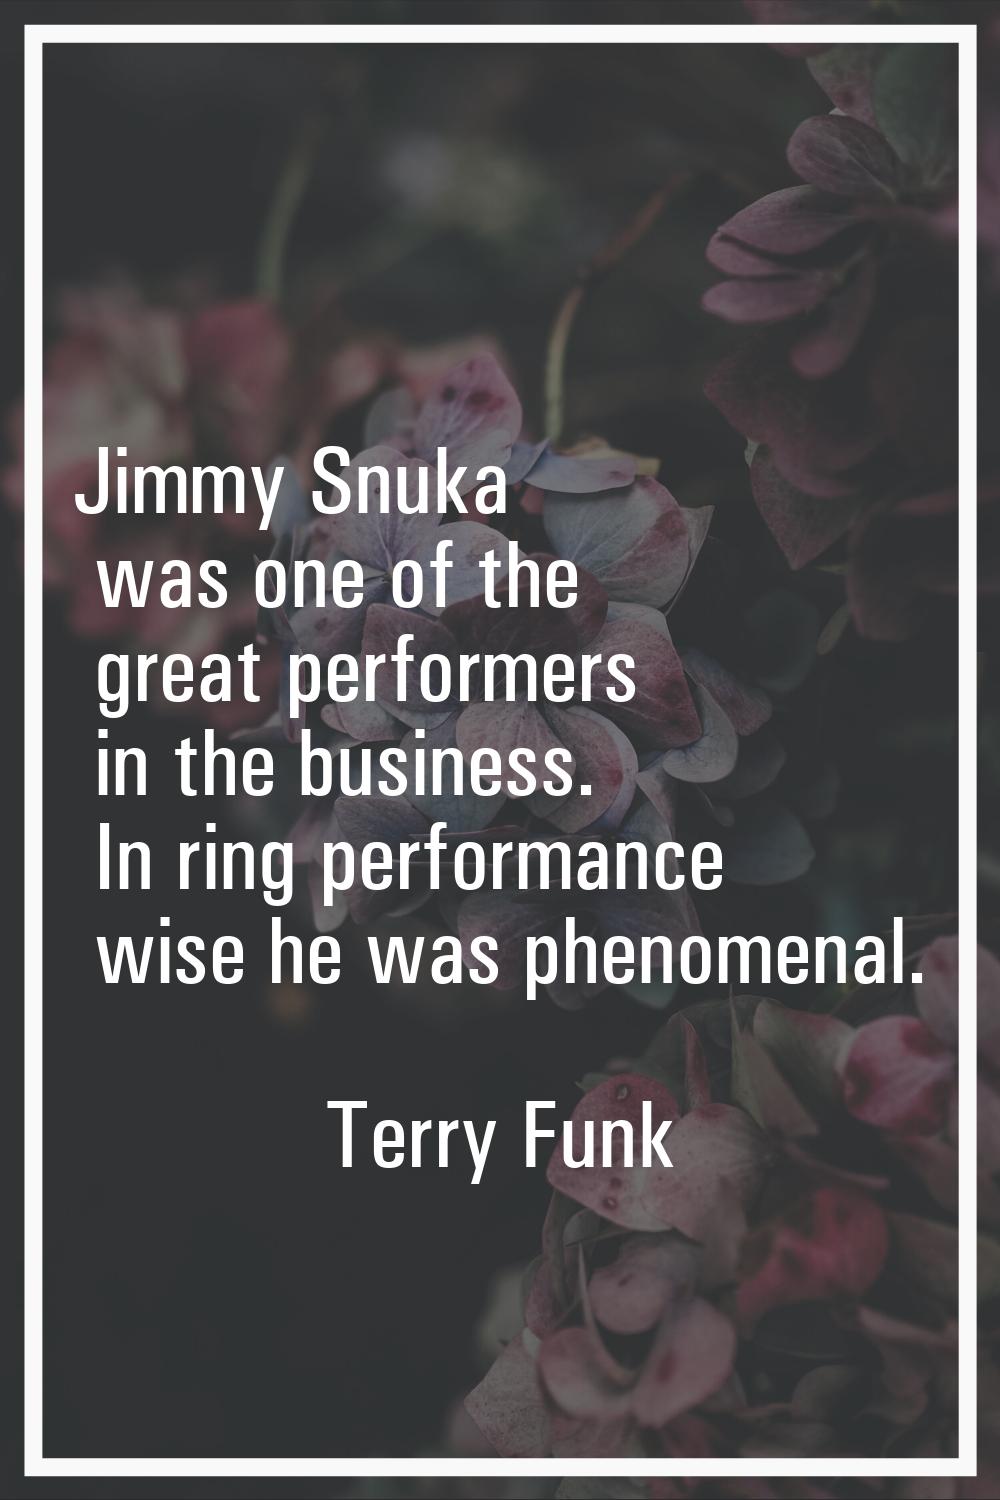 Jimmy Snuka was one of the great performers in the business. In ring performance wise he was phenom